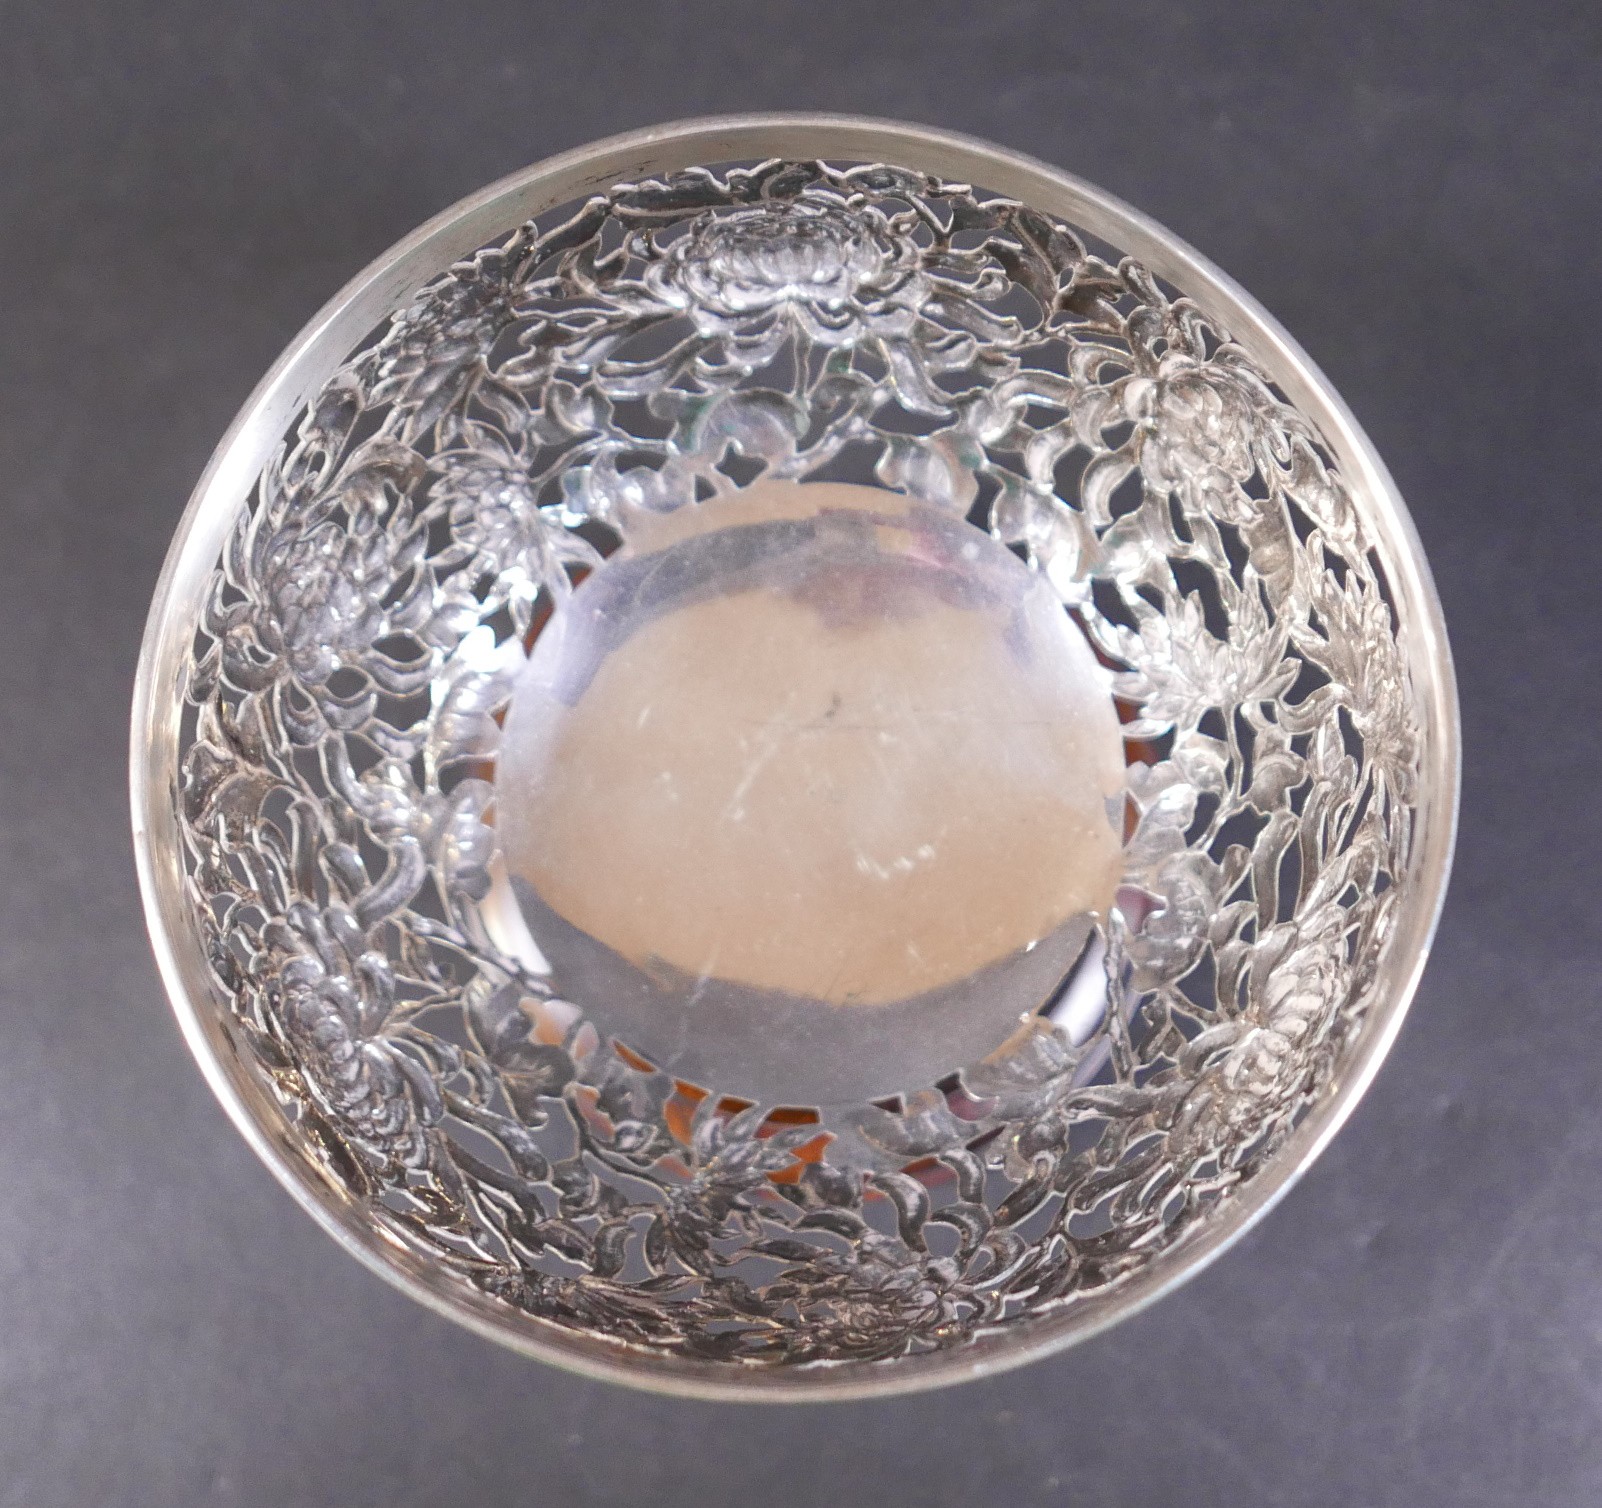 A Chinese silver bowl, circa 1900, by Luenwo, Shanghai, Canton, decorated with a pierced design of - Image 3 of 5